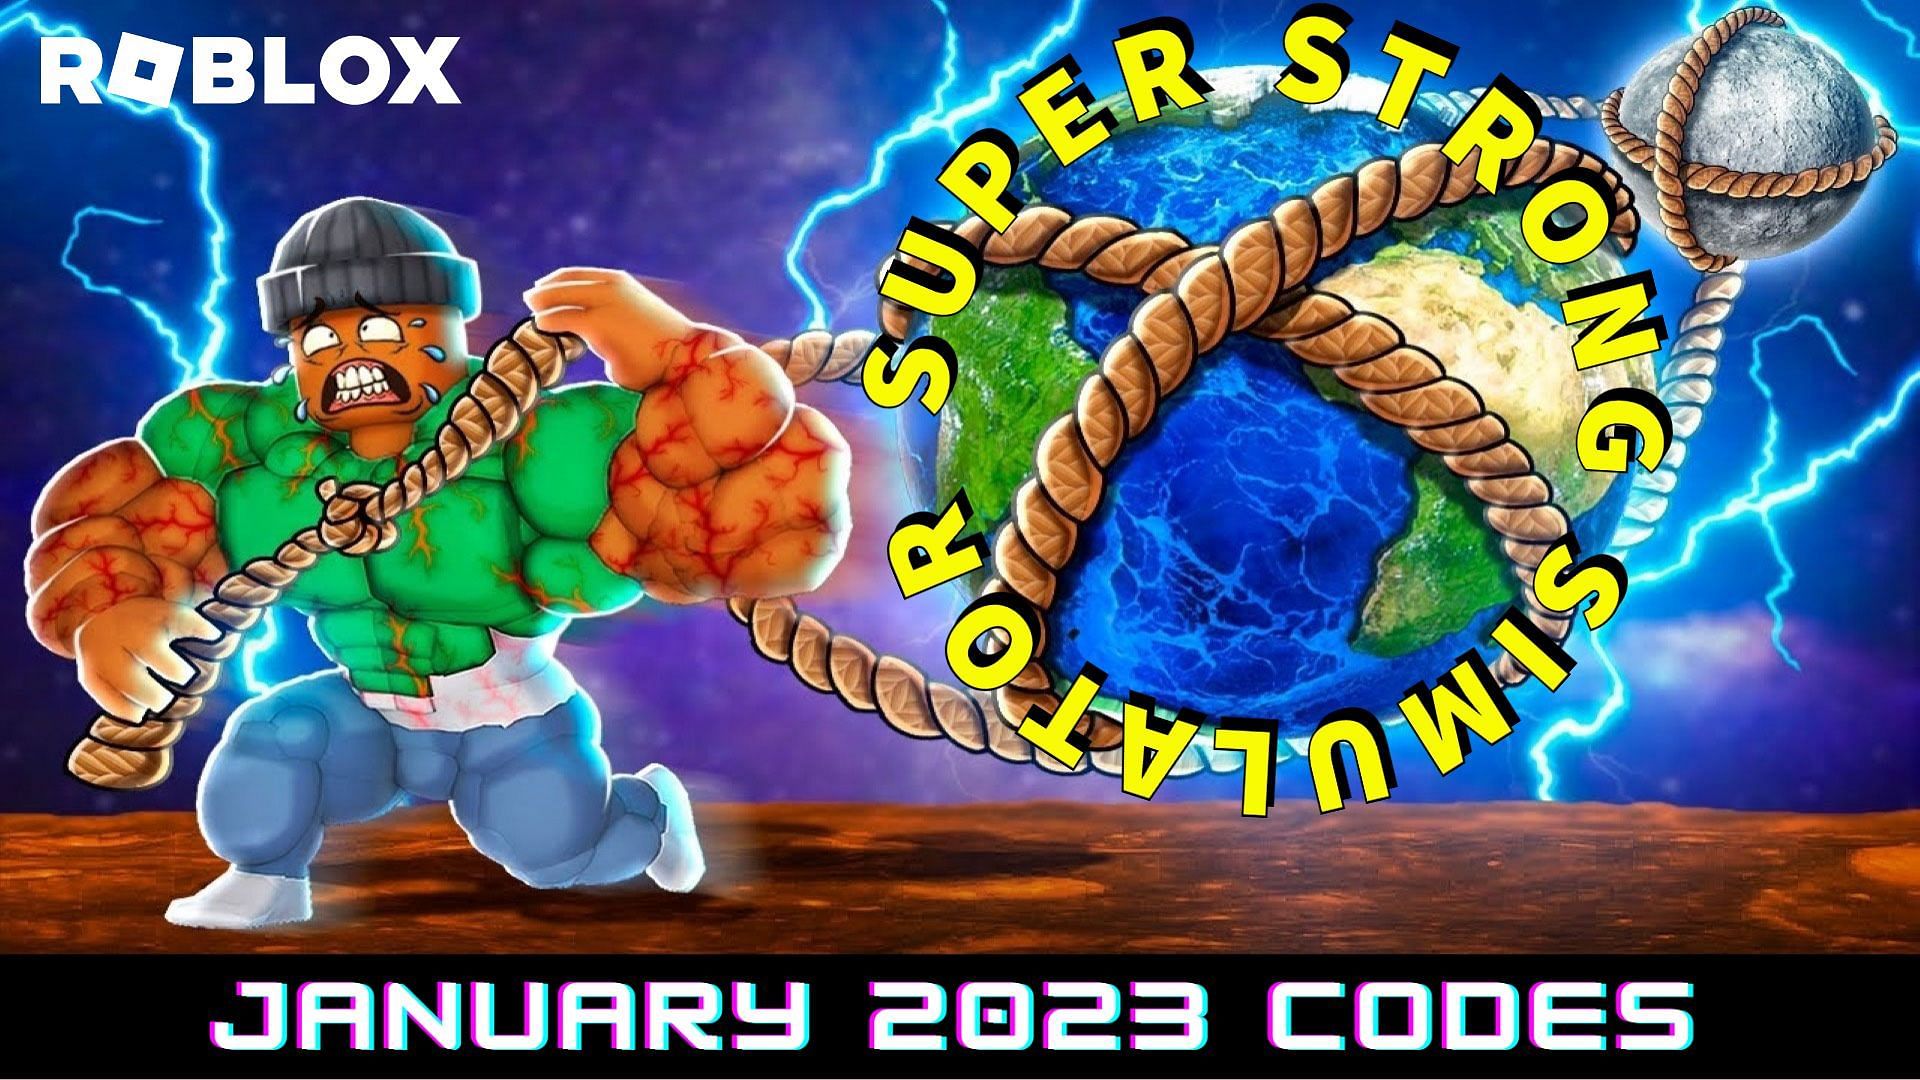 Roblox Super Strong Simulator Codes for January 2023: Free energy